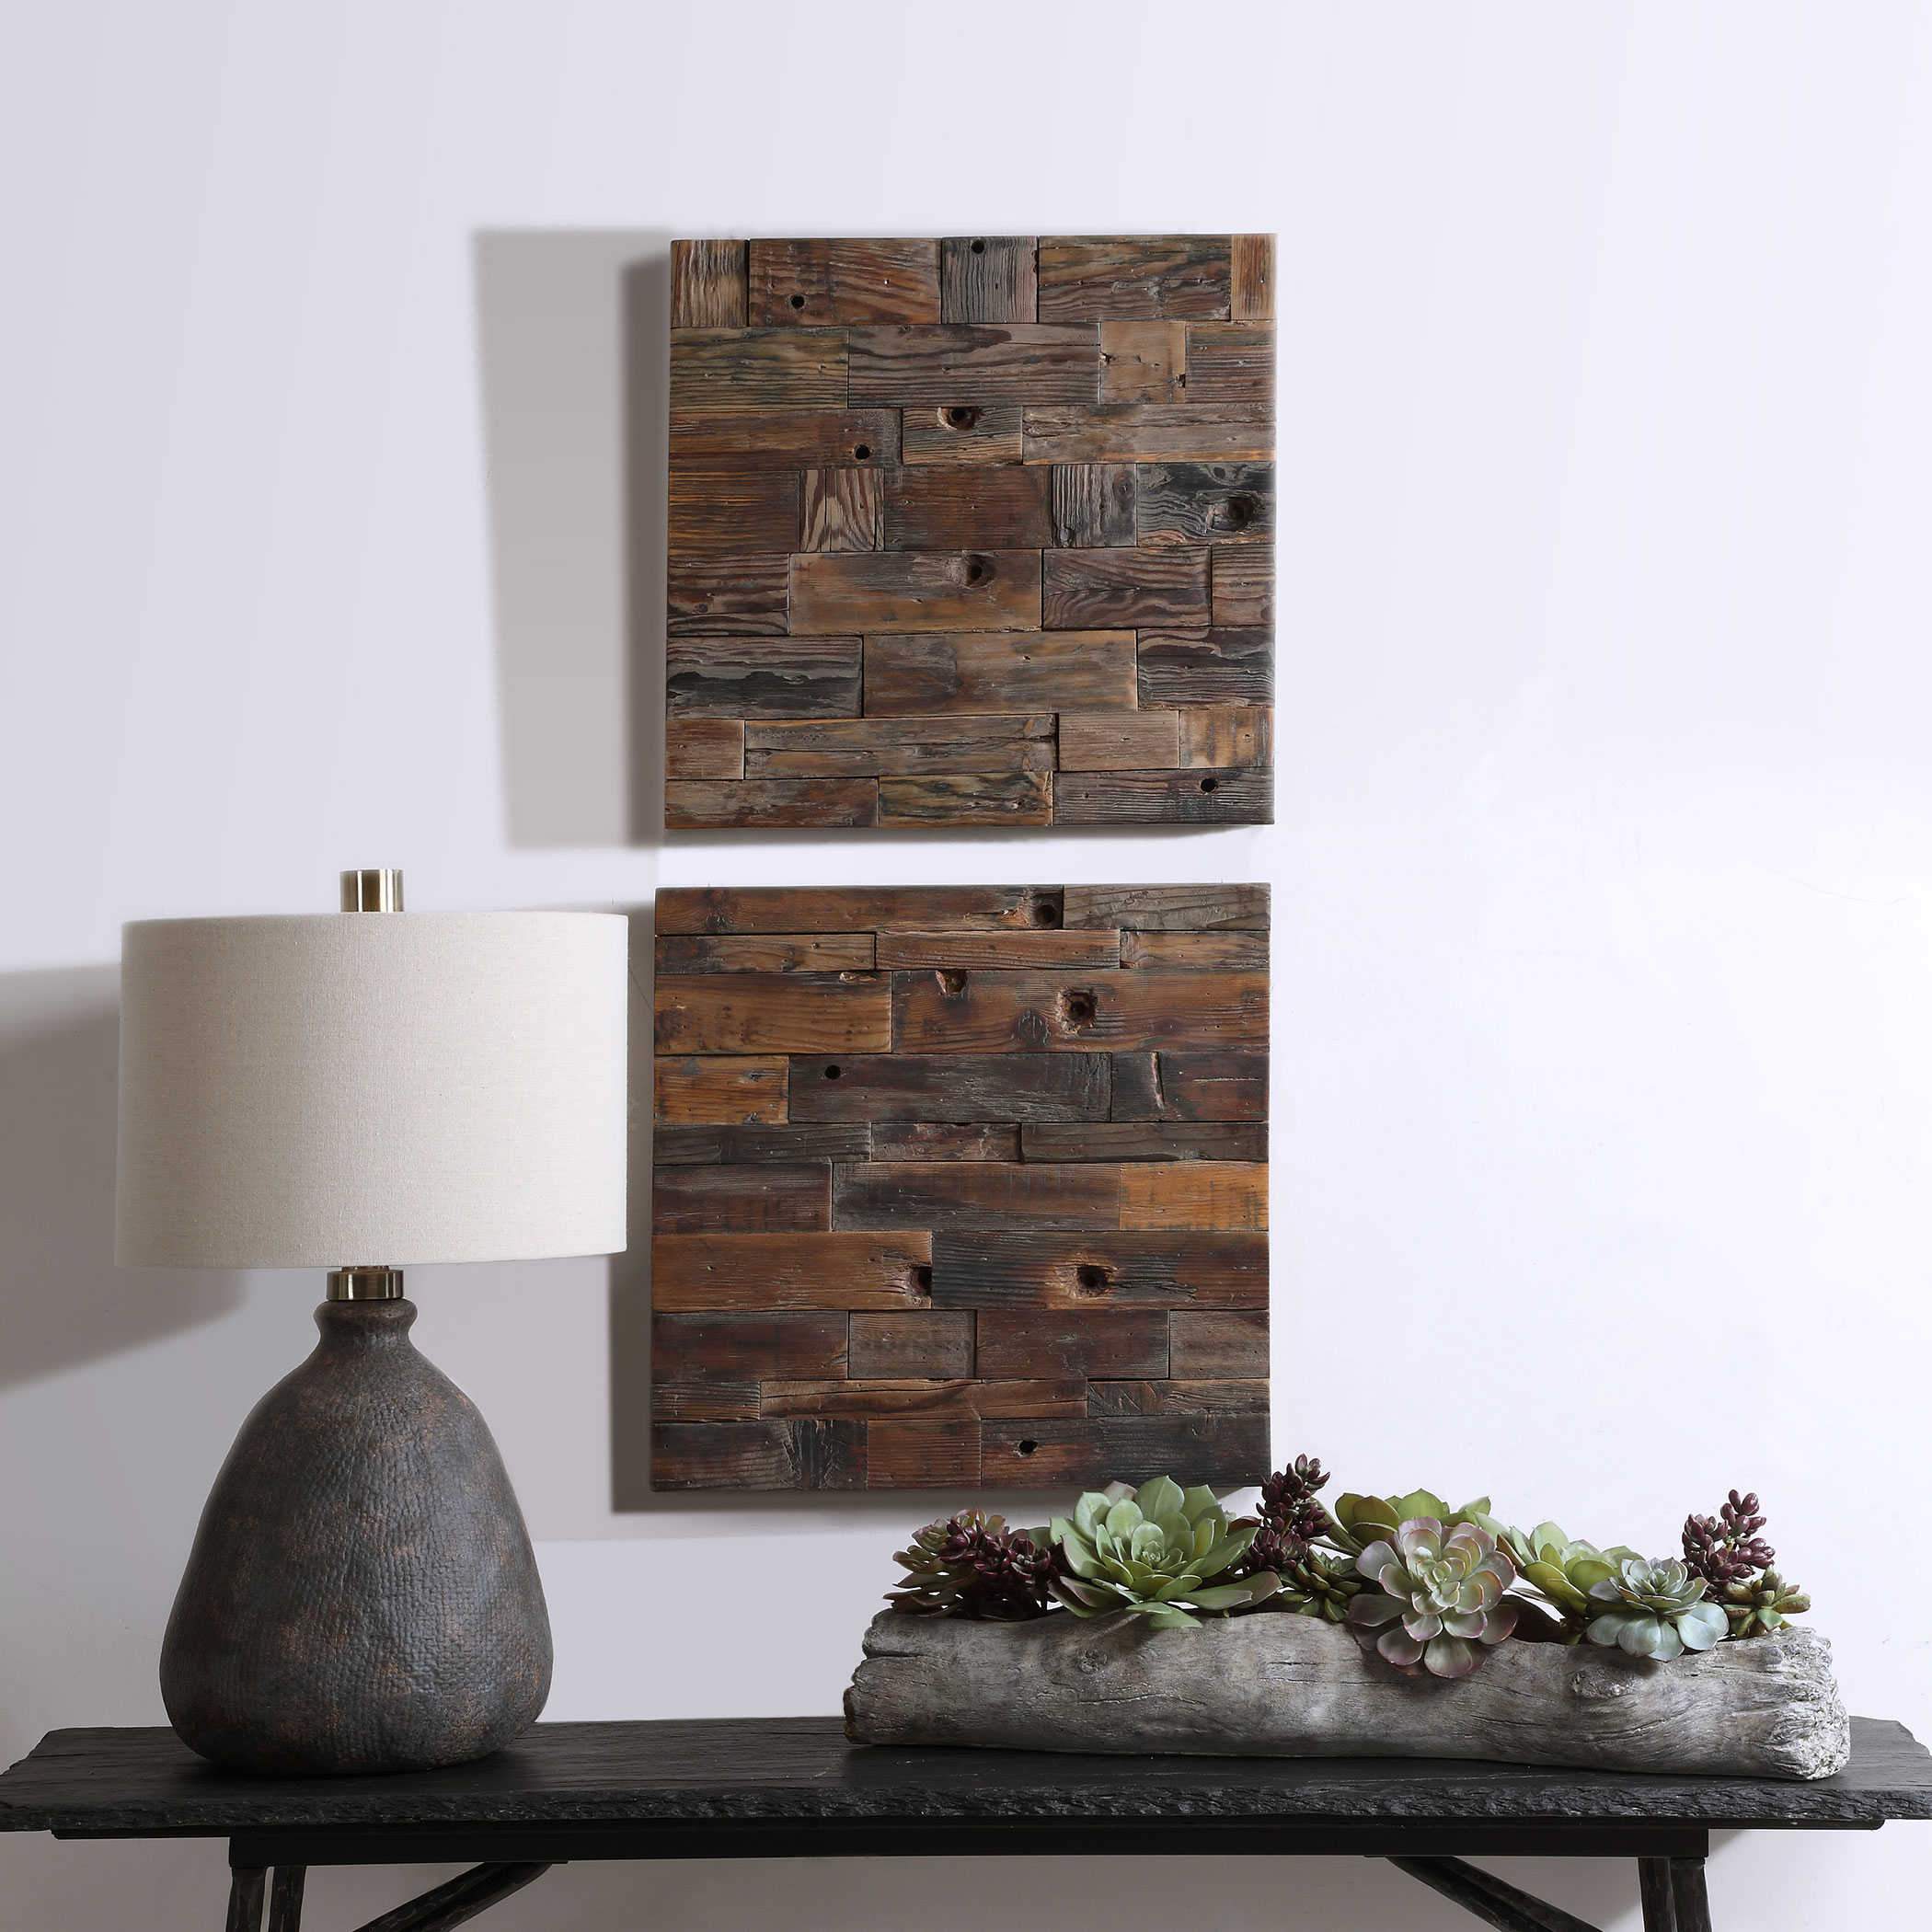 Uttermost Home Uttermost Astern Wood Wall Decor, S/2